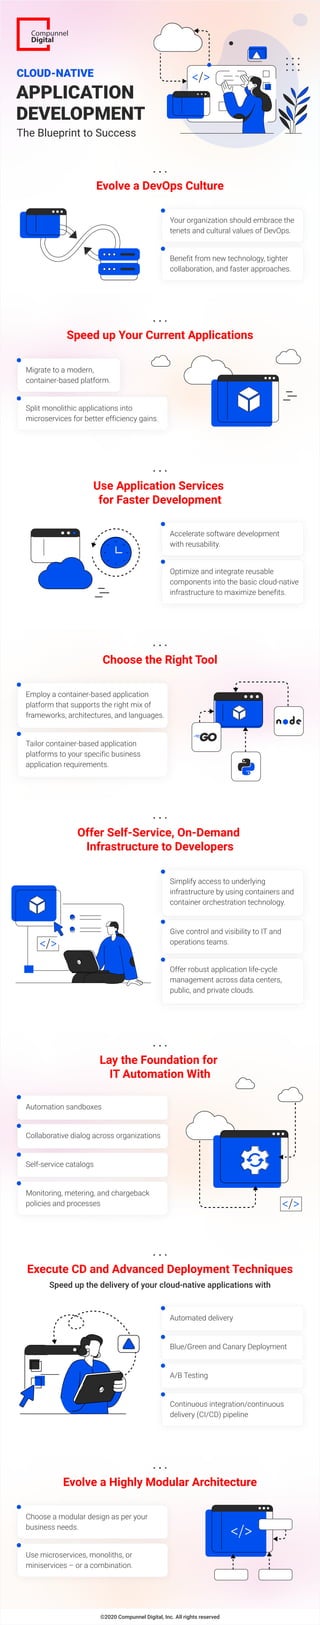 APPLICATION
DEVELOPMENT
The Blueprint to Success
CLOUD-NATIVE </>
Evolve a DevOps Culture
Your organization should embrace the
tenets and cultural values of DevOps.
Benefit from new technology, tighter
collaboration, and faster approaches.
Choose the Right Tool
Lay the Foundation for
IT Automation With
Offer Self-Service, On-Demand
Infrastructure to Developers
Employ a container-based application
platform that supports the right mix of
frameworks, architectures, and languages.
Automation sandboxes
Collaborative dialog across organizations
Self-service catalogs
Monitoring, metering, and chargeback
policies and processes
Automated delivery
Blue/Green and Canary Deployment
A/B Testing
Continuous integration/continuous
delivery (CI/CD) pipeline
Tailor container-based application
platforms to your specific business
application requirements.
Speed up Your Current Applications
Migrate to a modern,
container-based platform.
Split monolithic applications into
microservices for better efficiency gains.
Accelerate software development
with reusability.
Use Application Services
for Faster Development
Optimize and integrate reusable
components into the basic cloud-native
infrastructure to maximize benefits.
Simplify access to underlying
infrastructure by using containers and
container orchestration technology.
Offer robust application life-cycle
management across data centers,
public, and private clouds.
Give control and visibility to IT and
operations teams.
Evolve a Highly Modular Architecture
Execute CD and Advanced Deployment Techniques
Speed up the delivery of your cloud-native applications with
Choose a modular design as per your
business needs.
Use microservices, monoliths, or
miniservices – or a combination.
©2020 Compunnel Digital, Inc. All rights reserved
</>
</>
</>
 